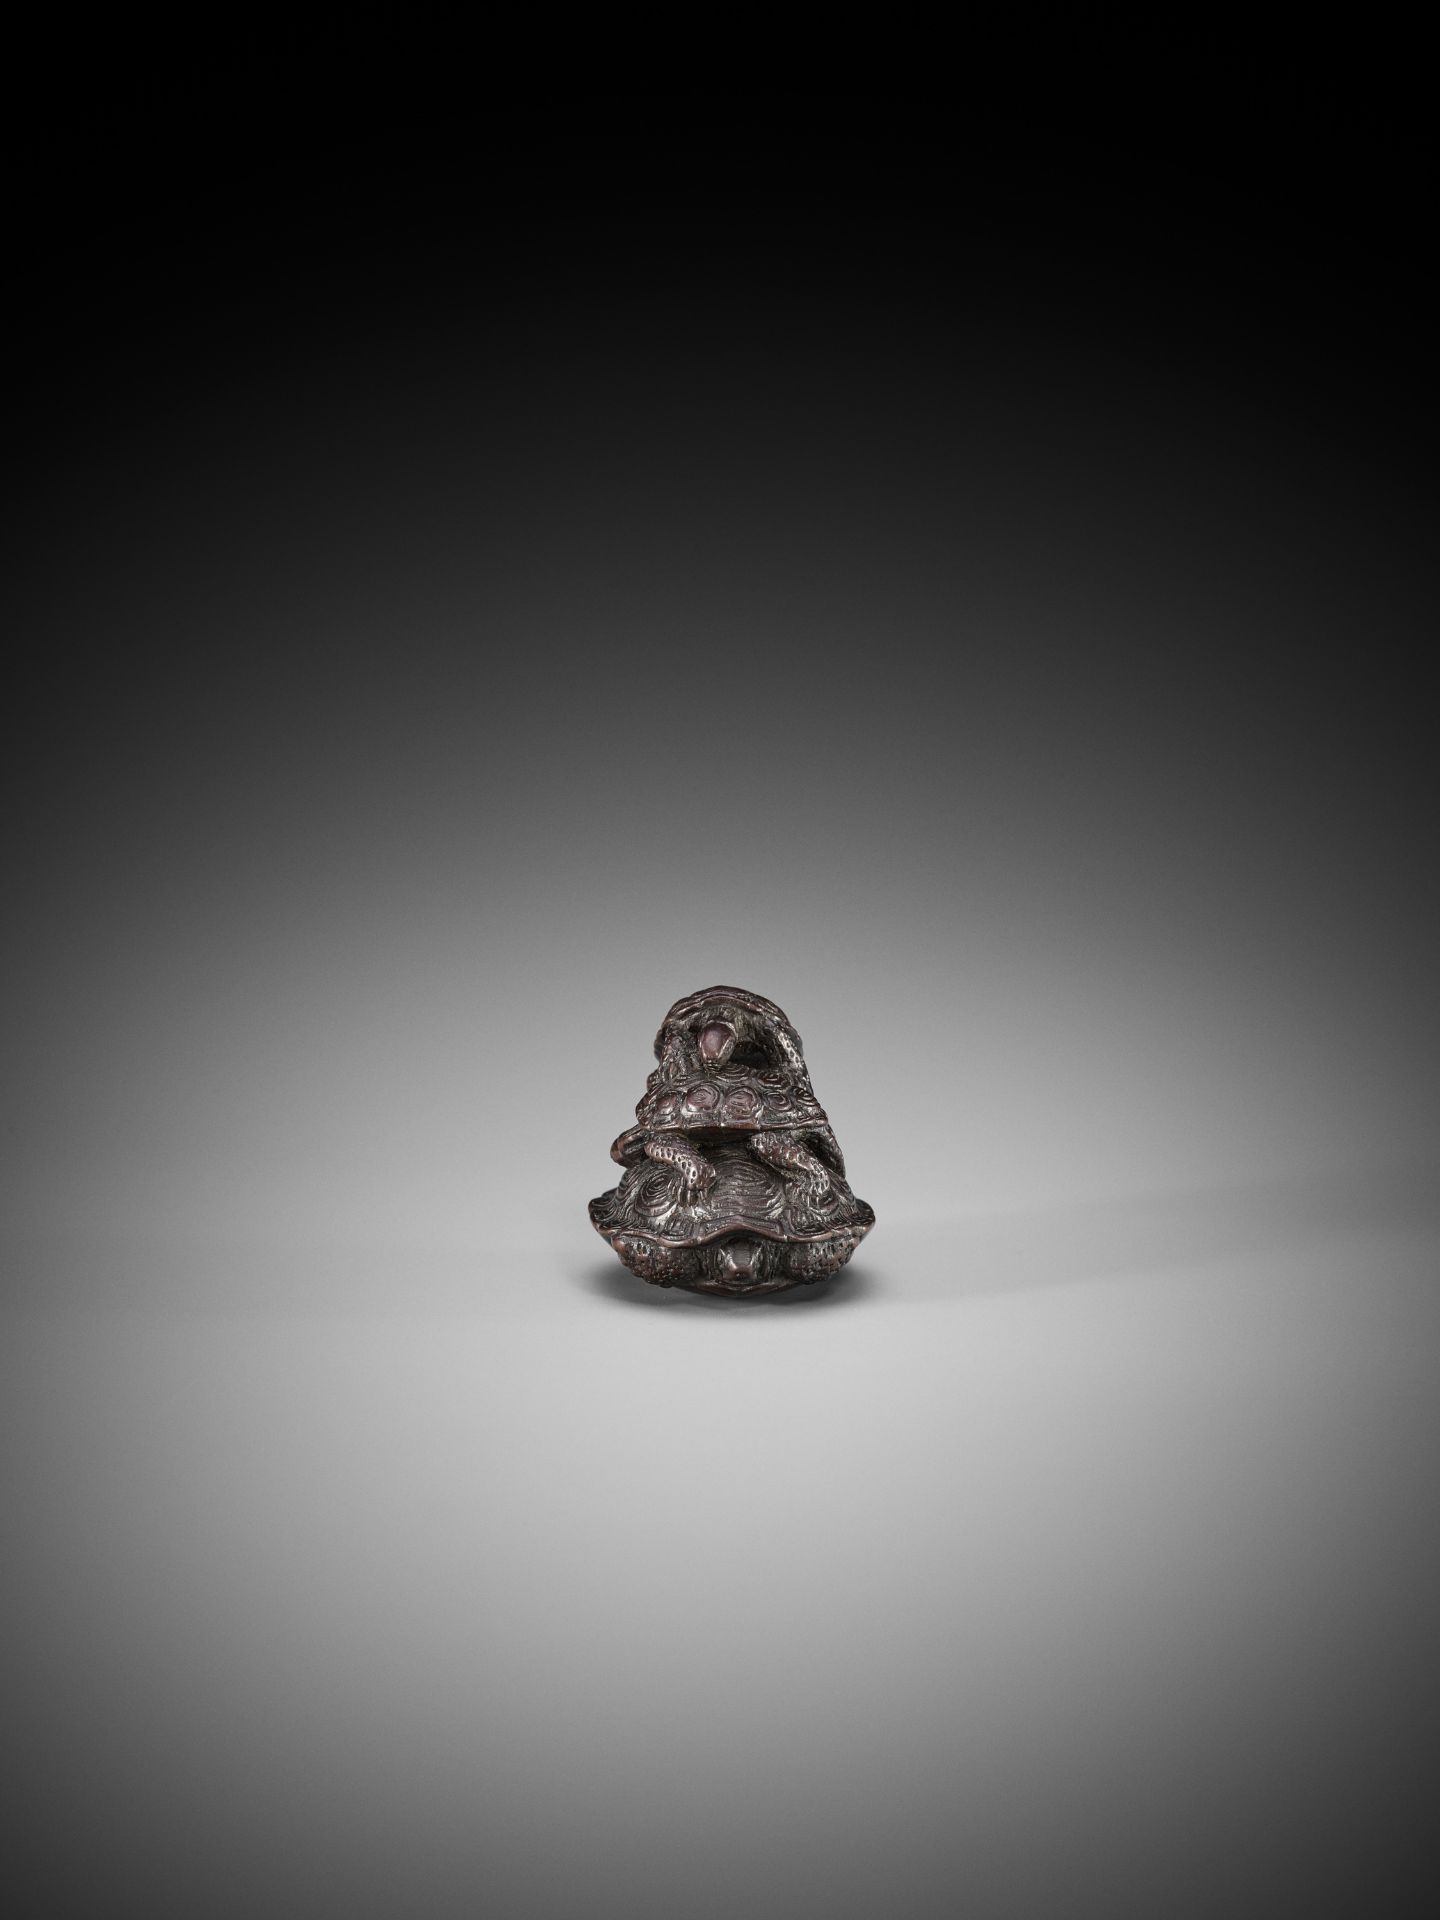 A WOOD NETSUKE OF A THREE TURTLES IN A PYRAMID - Image 6 of 8